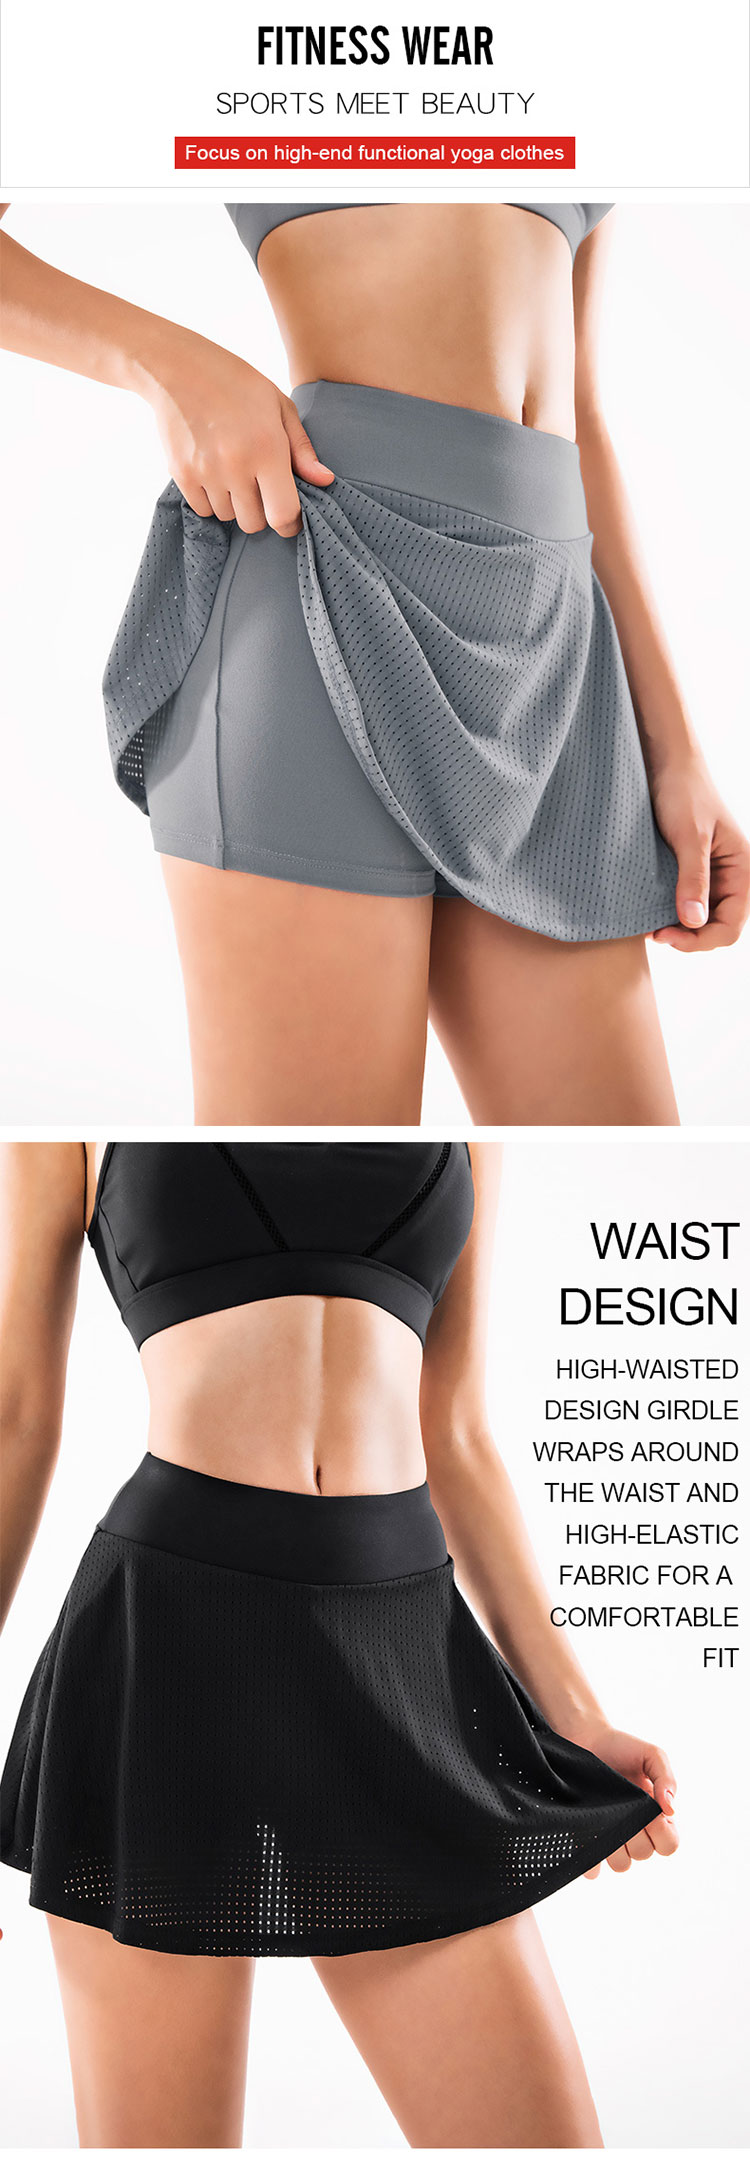 Waist-design-high-waisted-design-girdle-wraps-around-the-waist-and-high-elastic-fabric-for-a-comfortable-fit